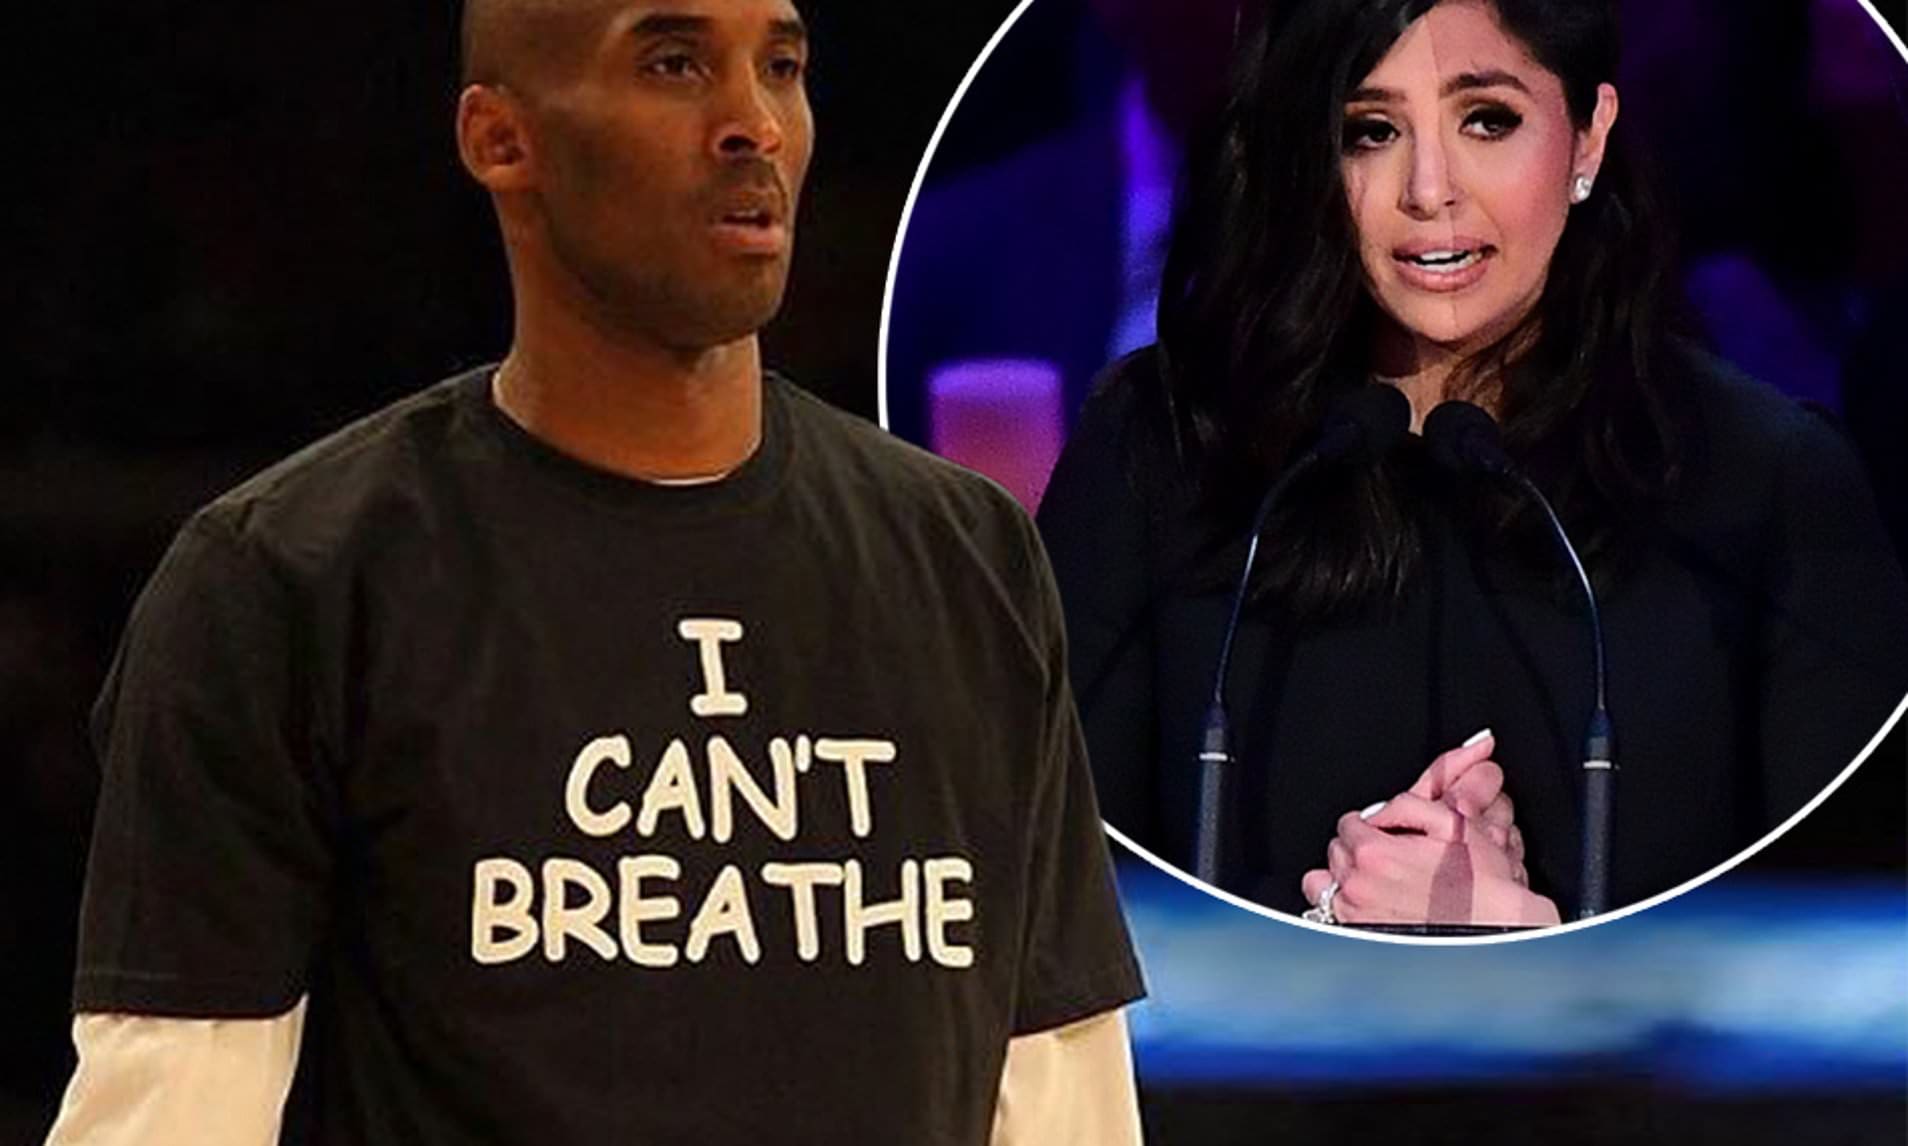 ”vanessa-bryant-posts-photo-of-kobe-wearing-i-cant-breathe-t-shirt-and-responds-to-troll”